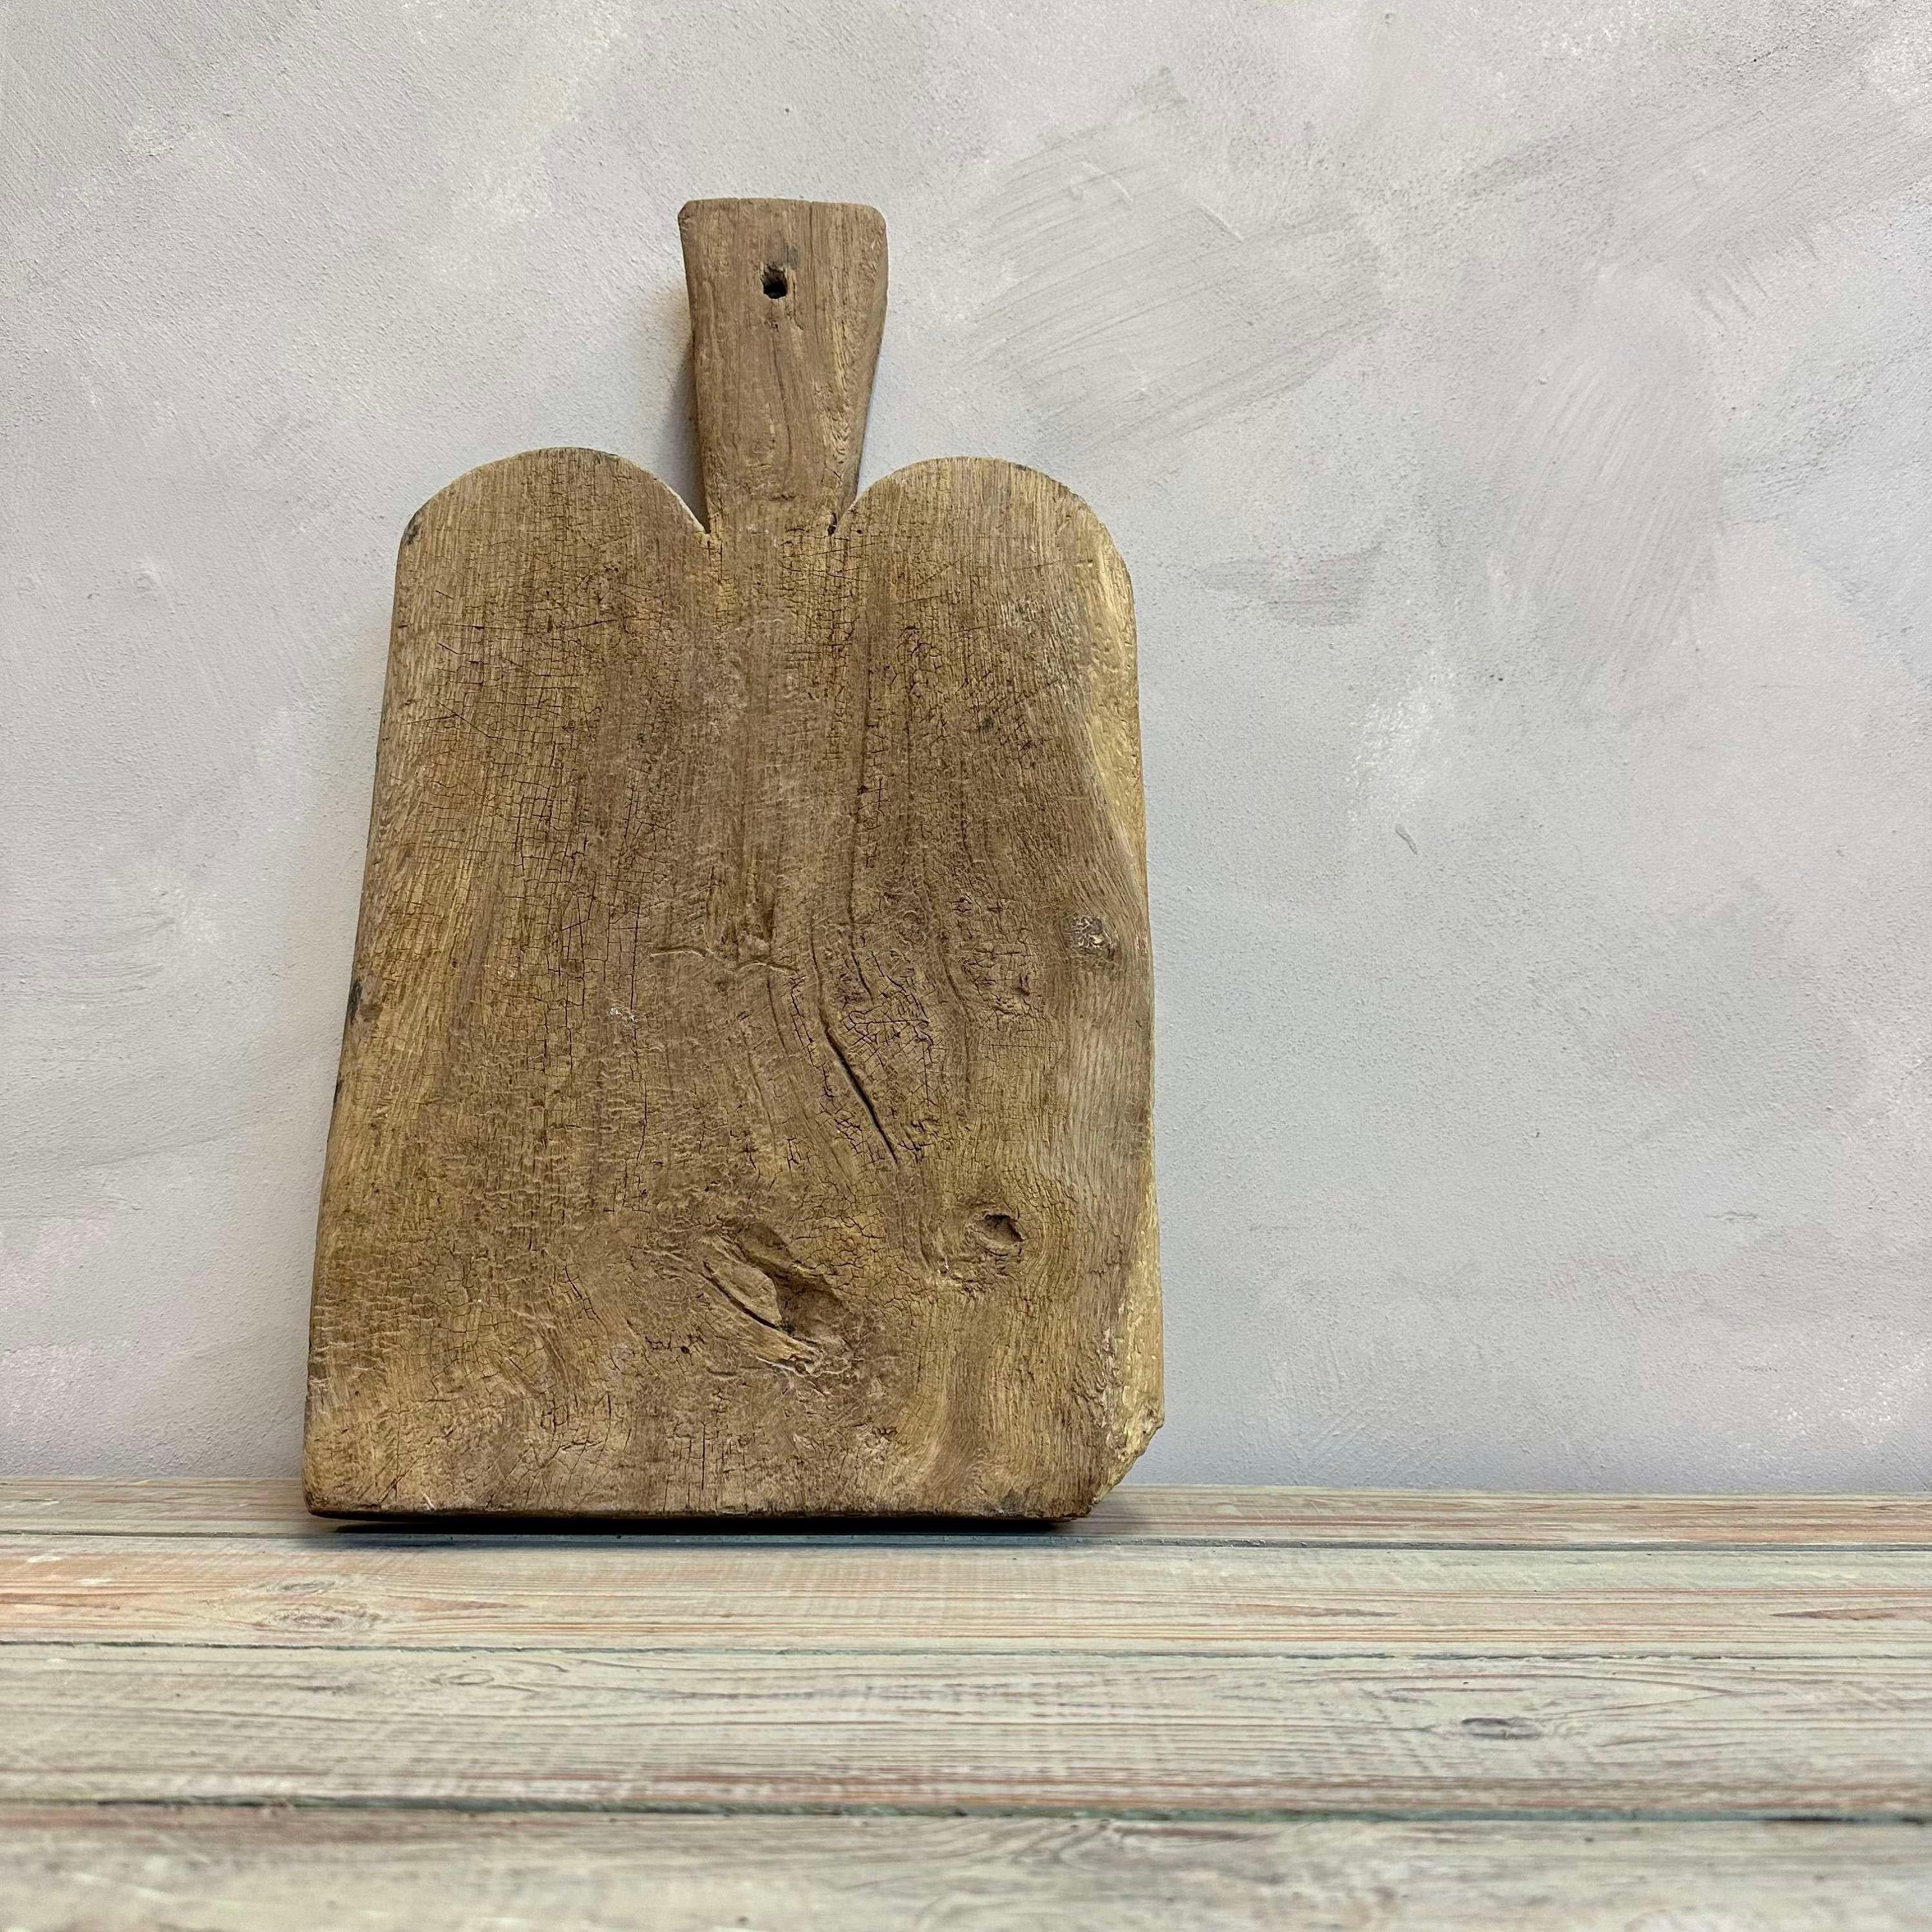 Early 19th Century French primitive cutting board.
From use this has a lovely gnarled texture.

Height -49cm
Width -27cm
Depth -5cm

Please message if any further info or photos are required 

We are happy to work with you with your choice of